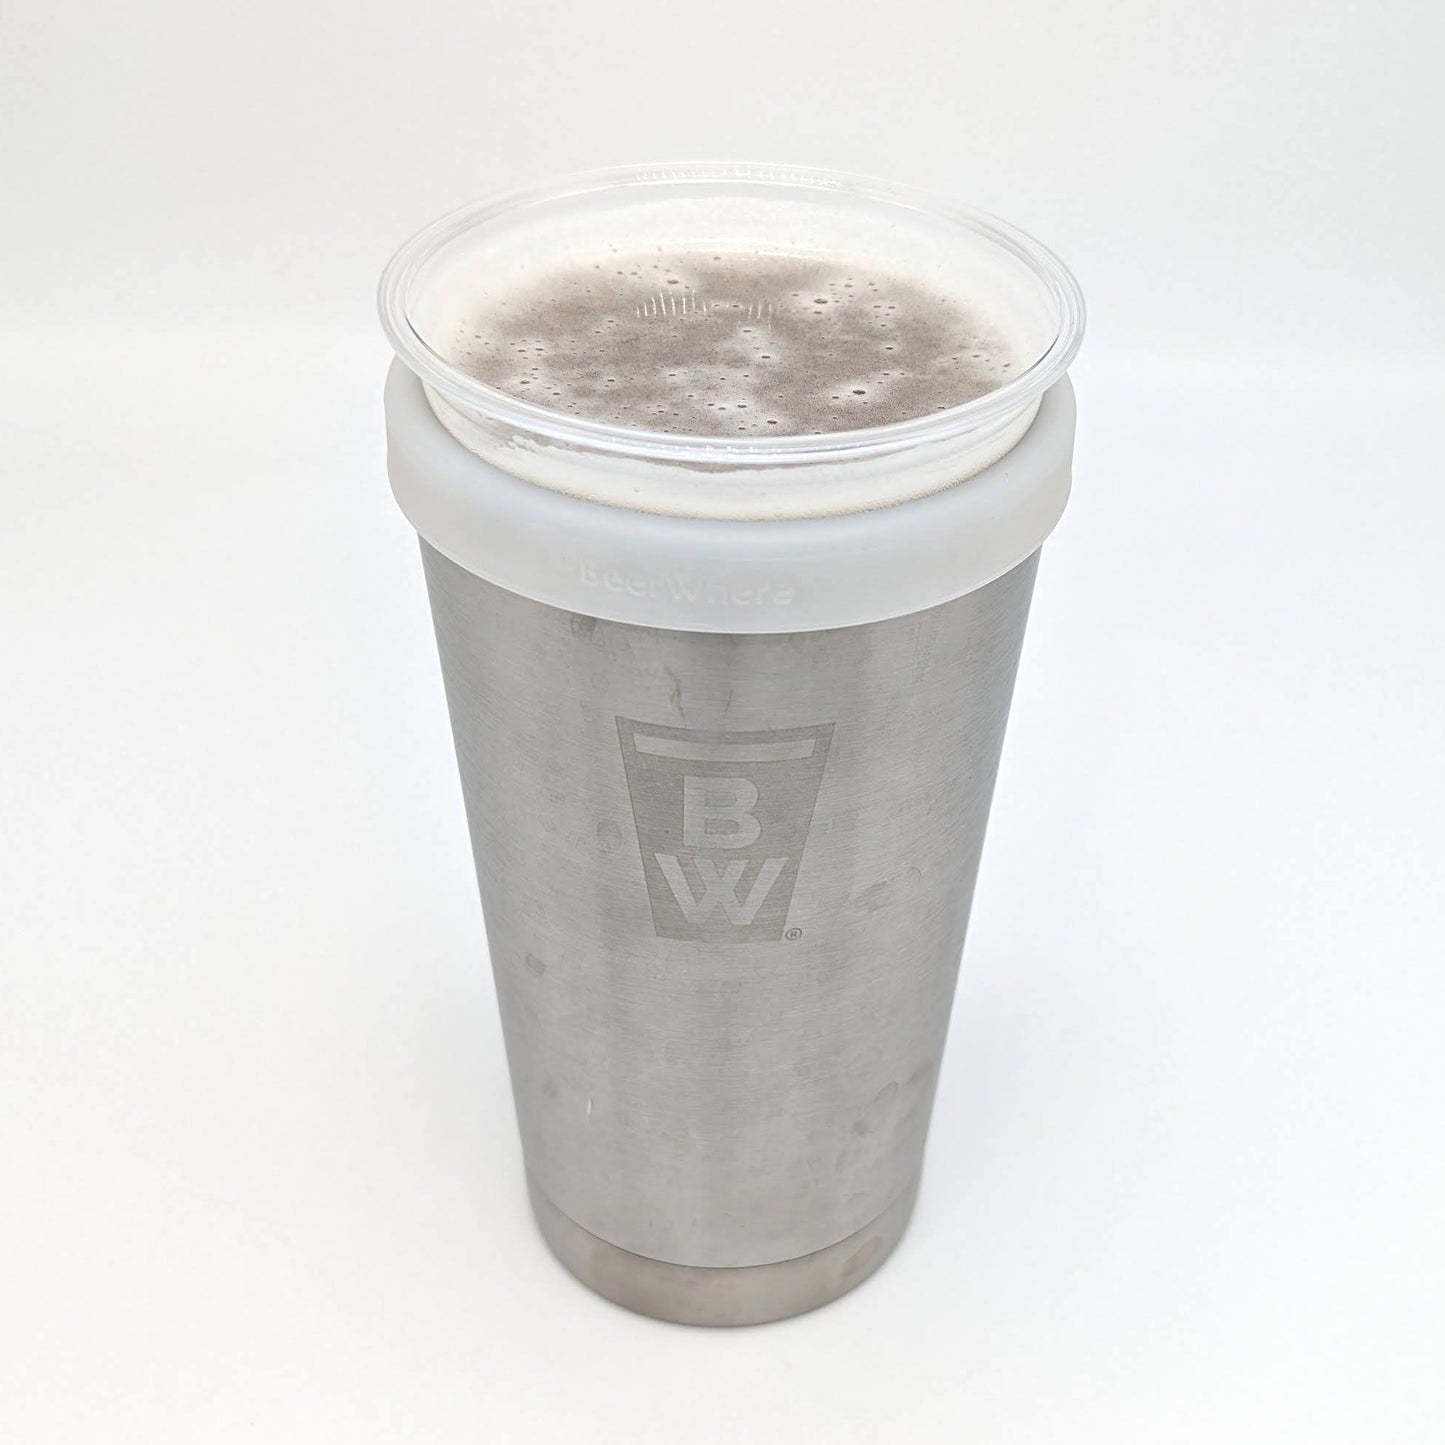 6PINT 20 oz. Tumbler and Beer Cup Cooler (tumbler only)